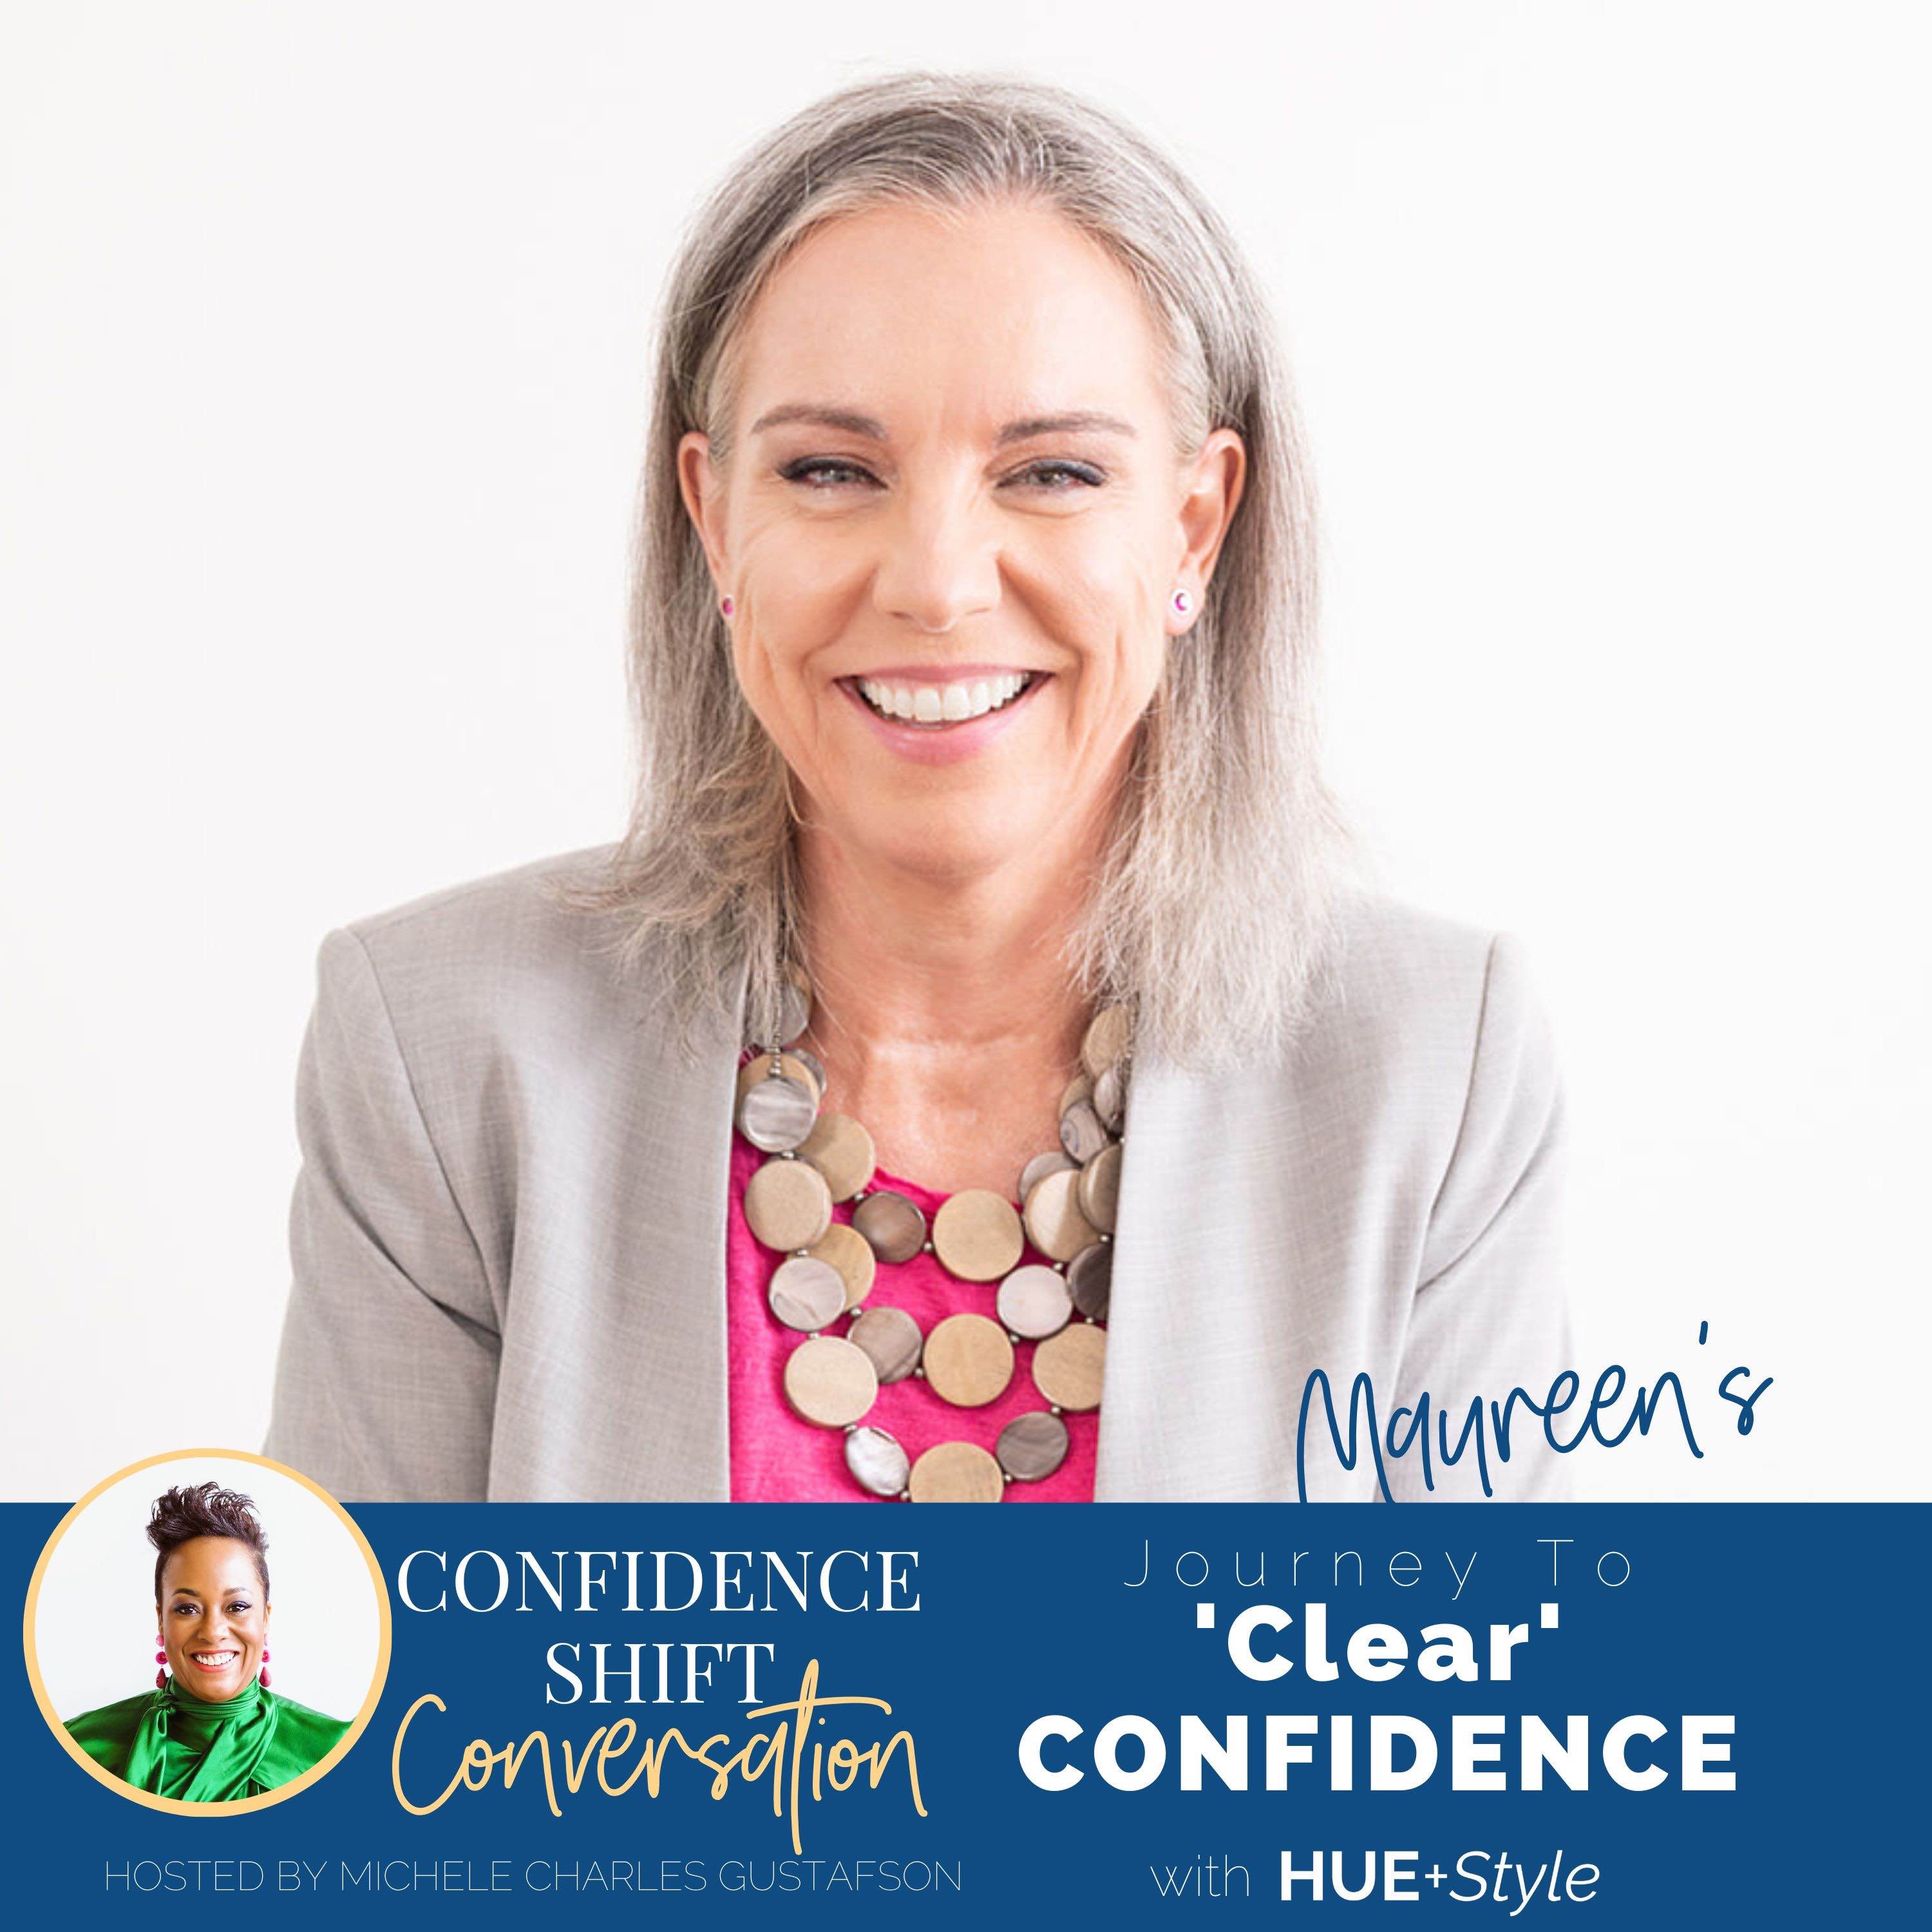 Journey To Clear Confidence with Maureen: From A Rut To Ready For More